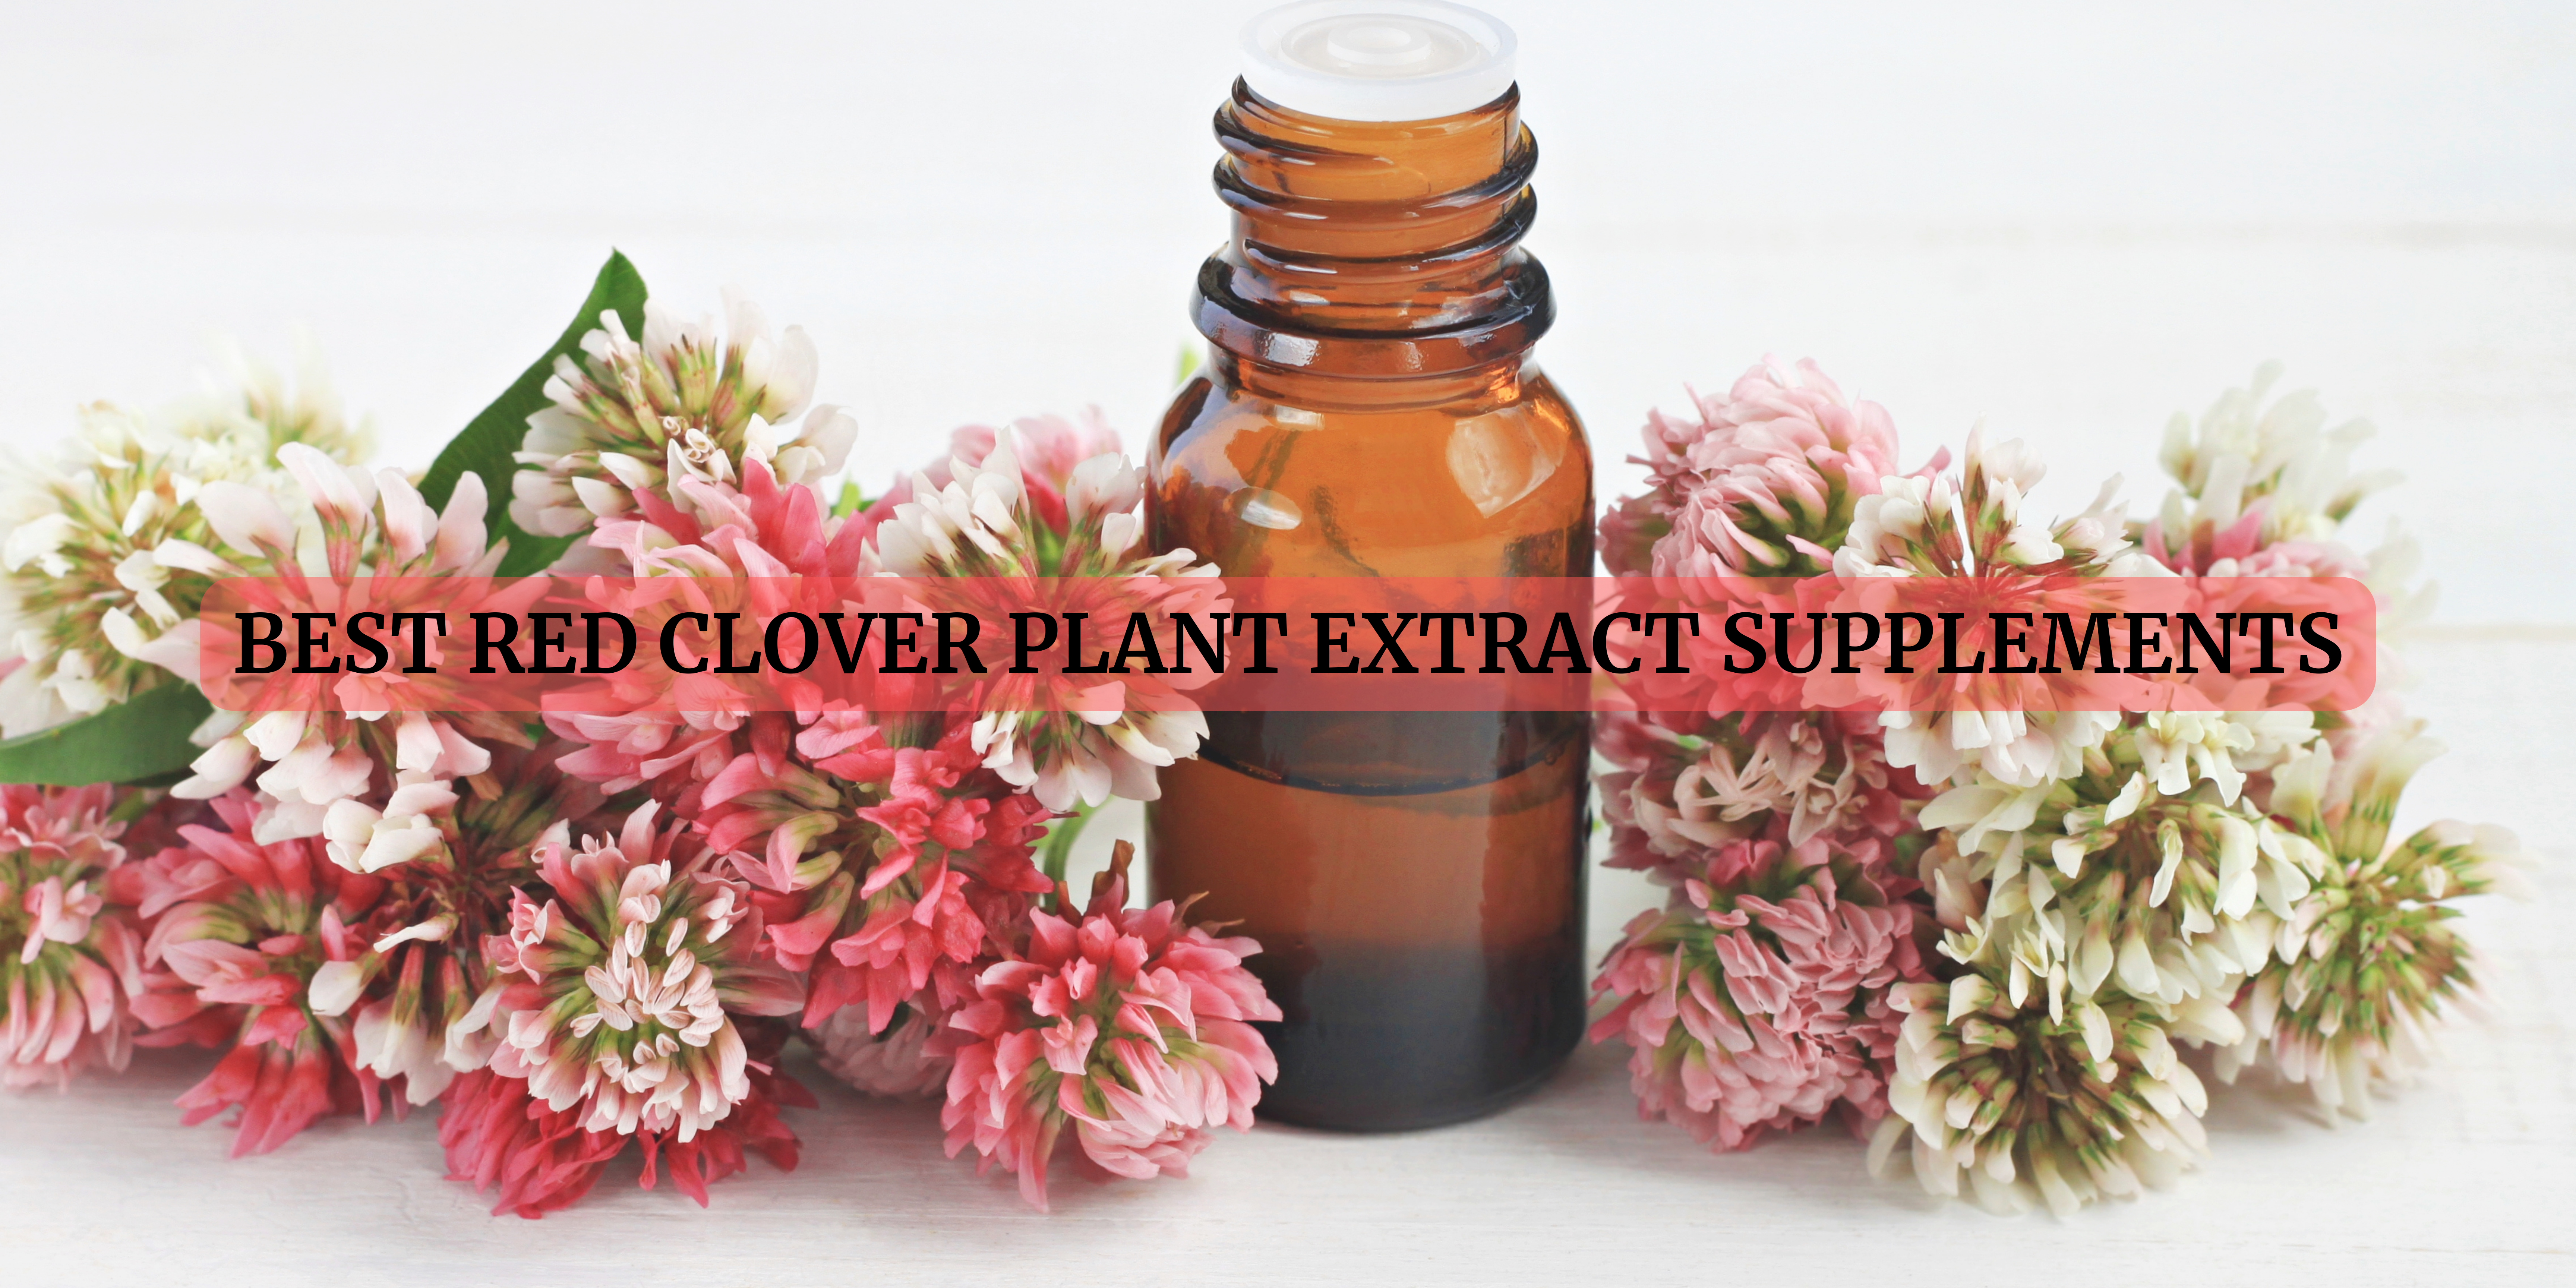 red clover extract supplements in USA